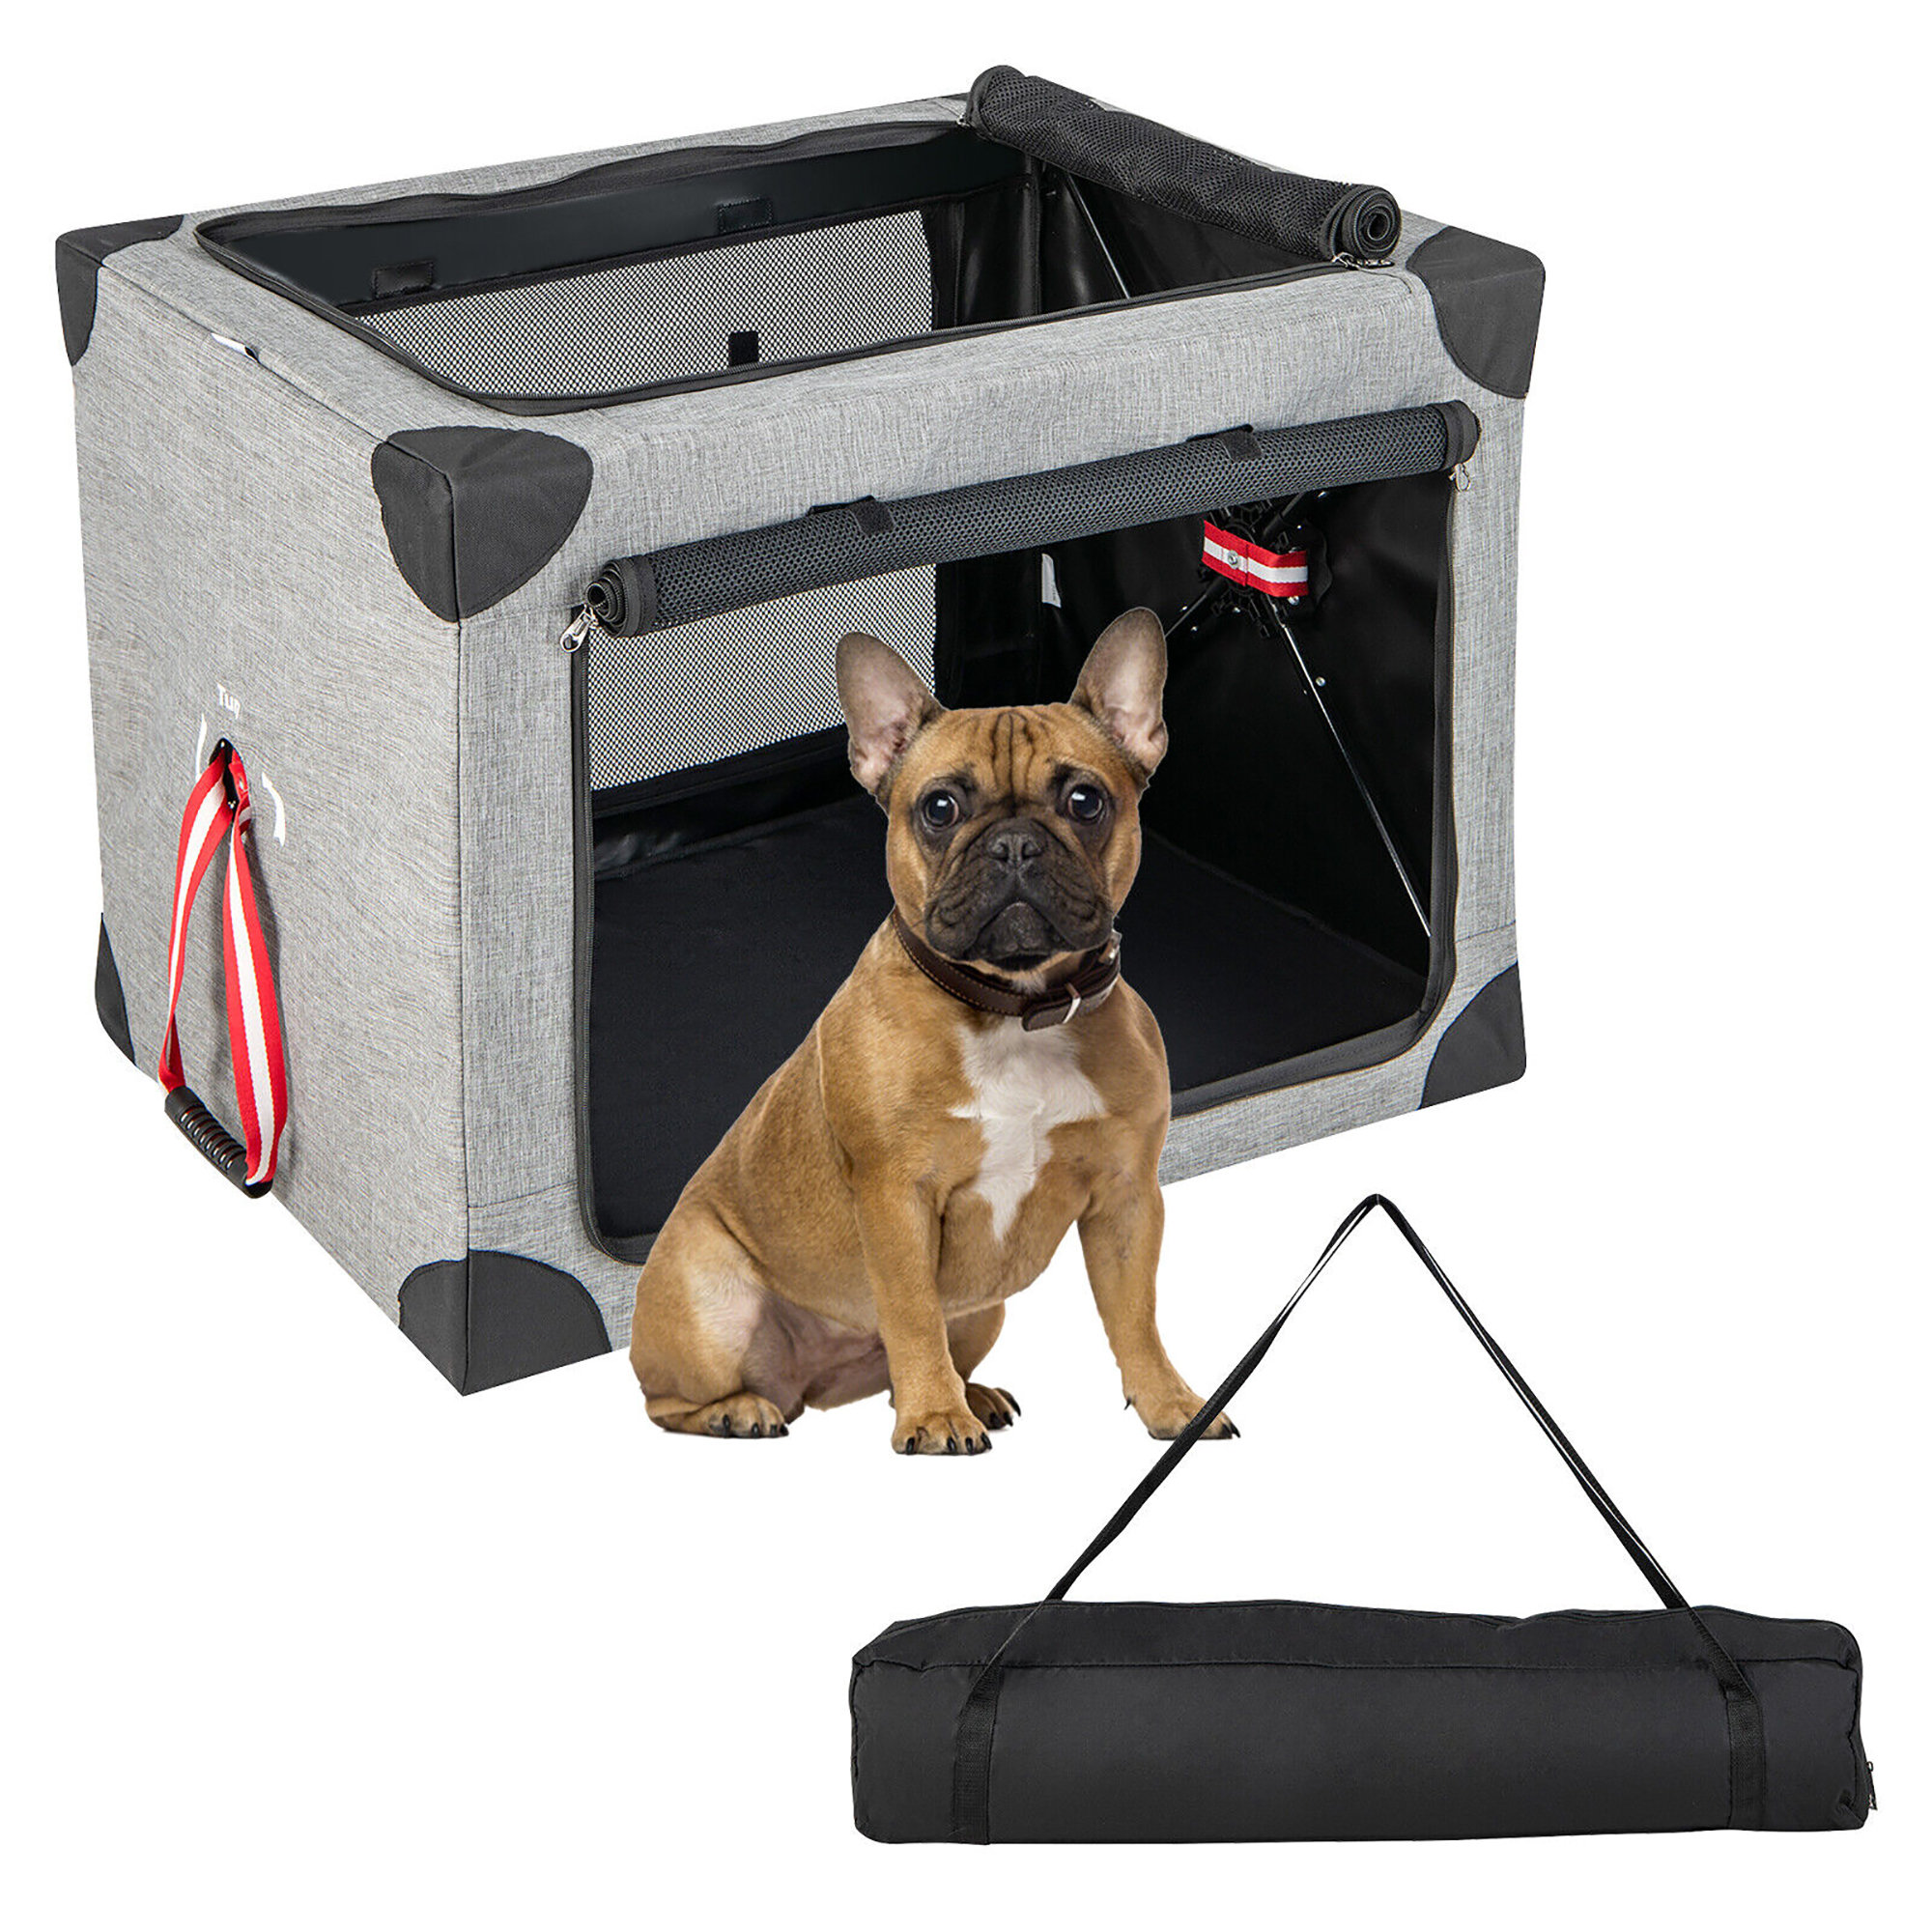 Collapsible Pet Crate, XXXL/XXL, Portable Soft Dog Crate, Oxford